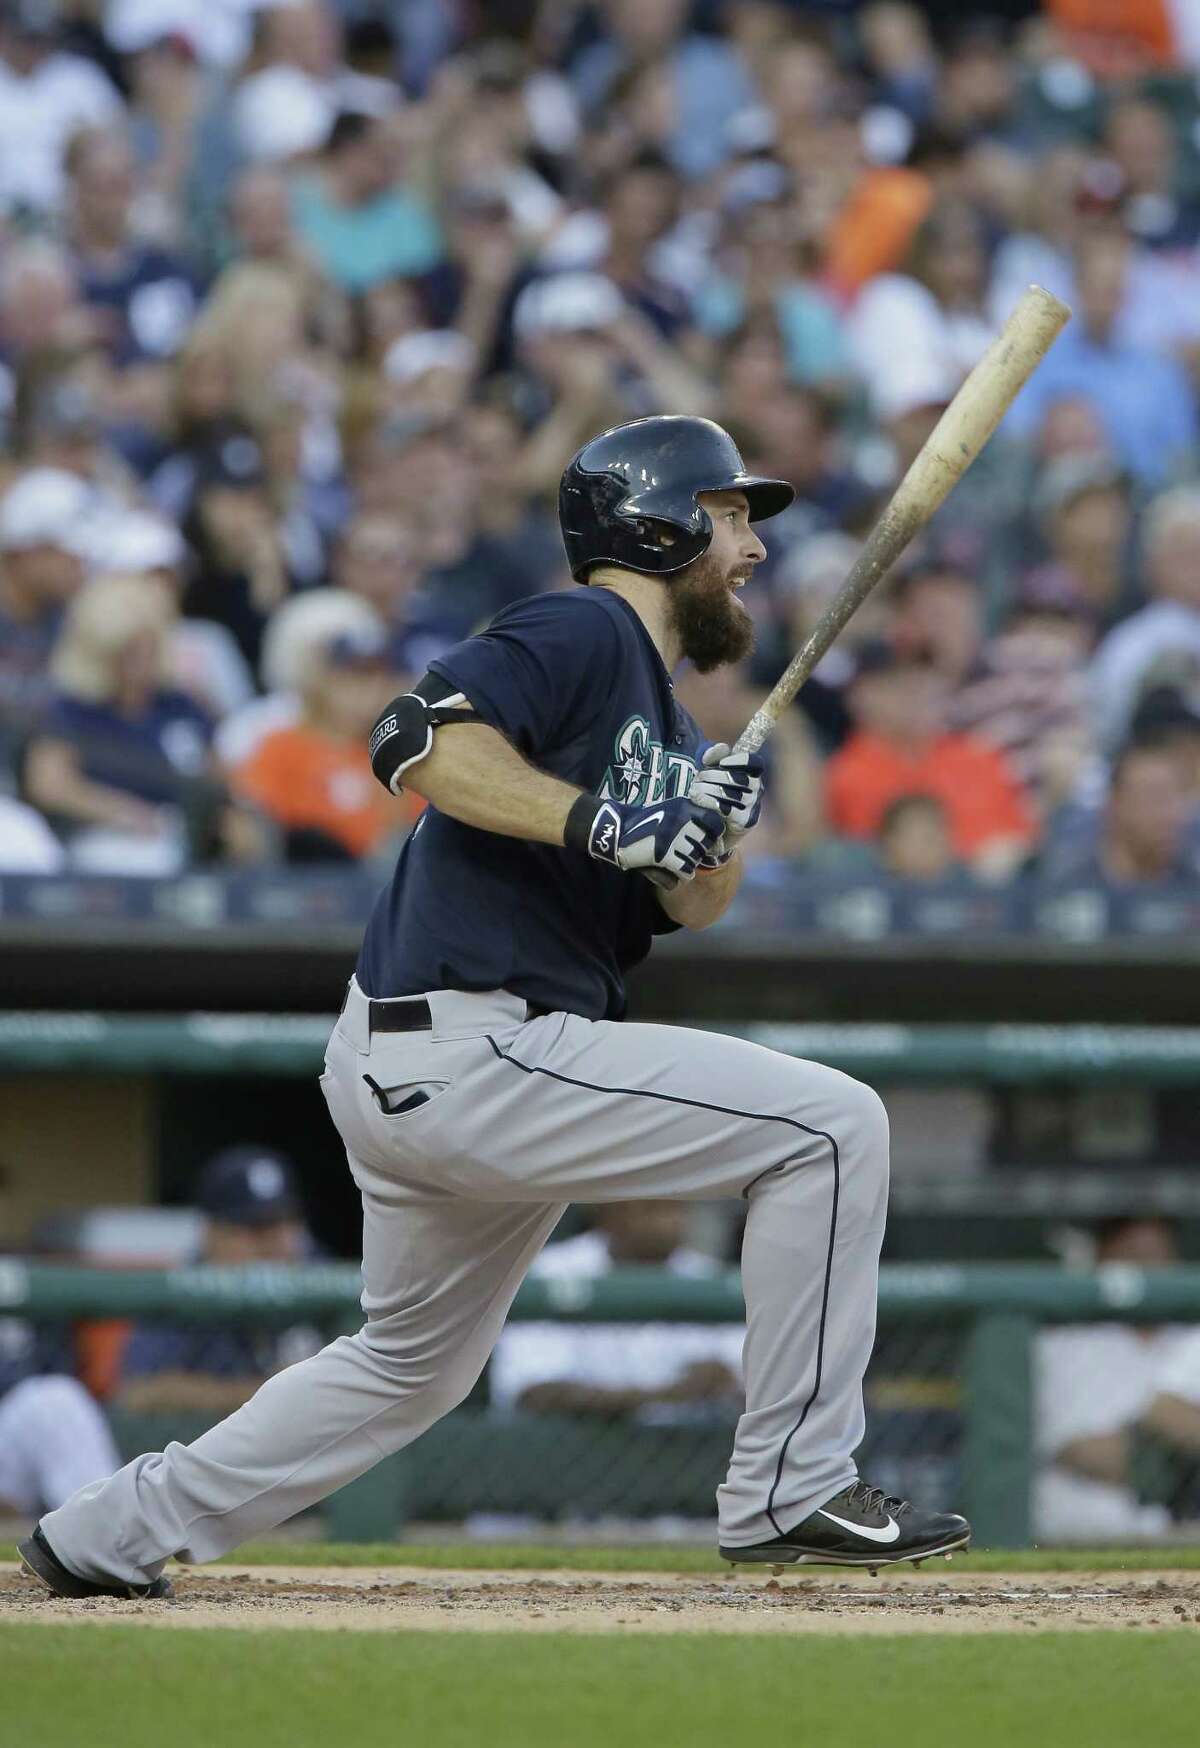 The New York Yankees placed Dustin Ackley on the 15-day DL.